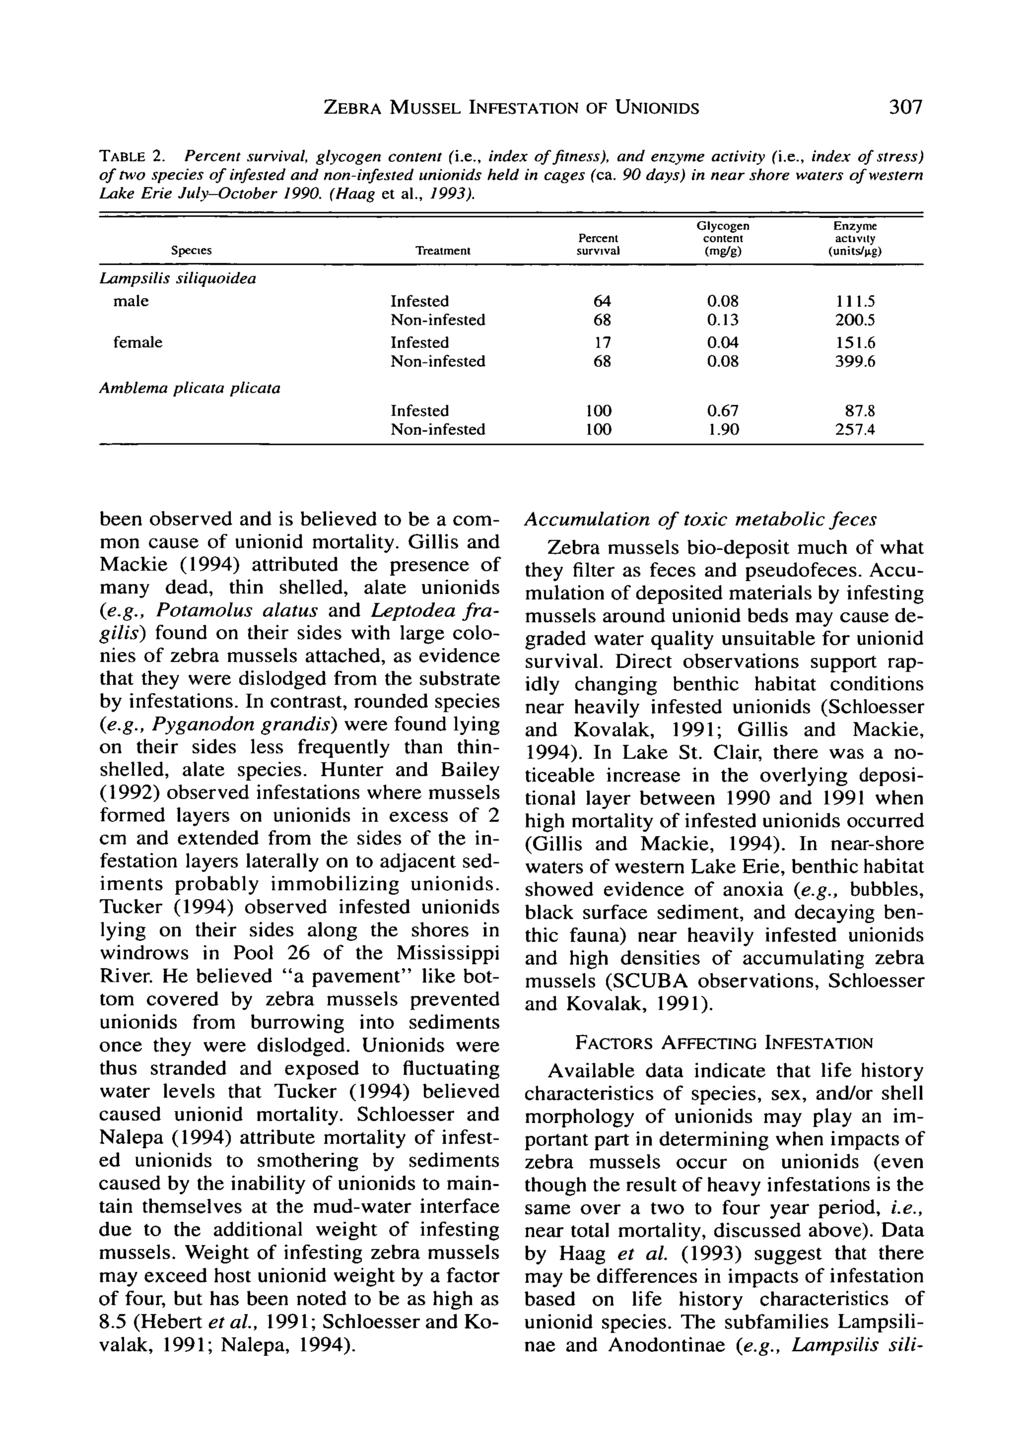 ZEBRA MUSSEL INFESTATION OF UNIONIDS 307 TABLE 2. Percent survival, glycogen content (i.e., index of fitness), and enzyme activity (i.e., index of stress) of two species of infested and non-infested unionids held in cages (ca.